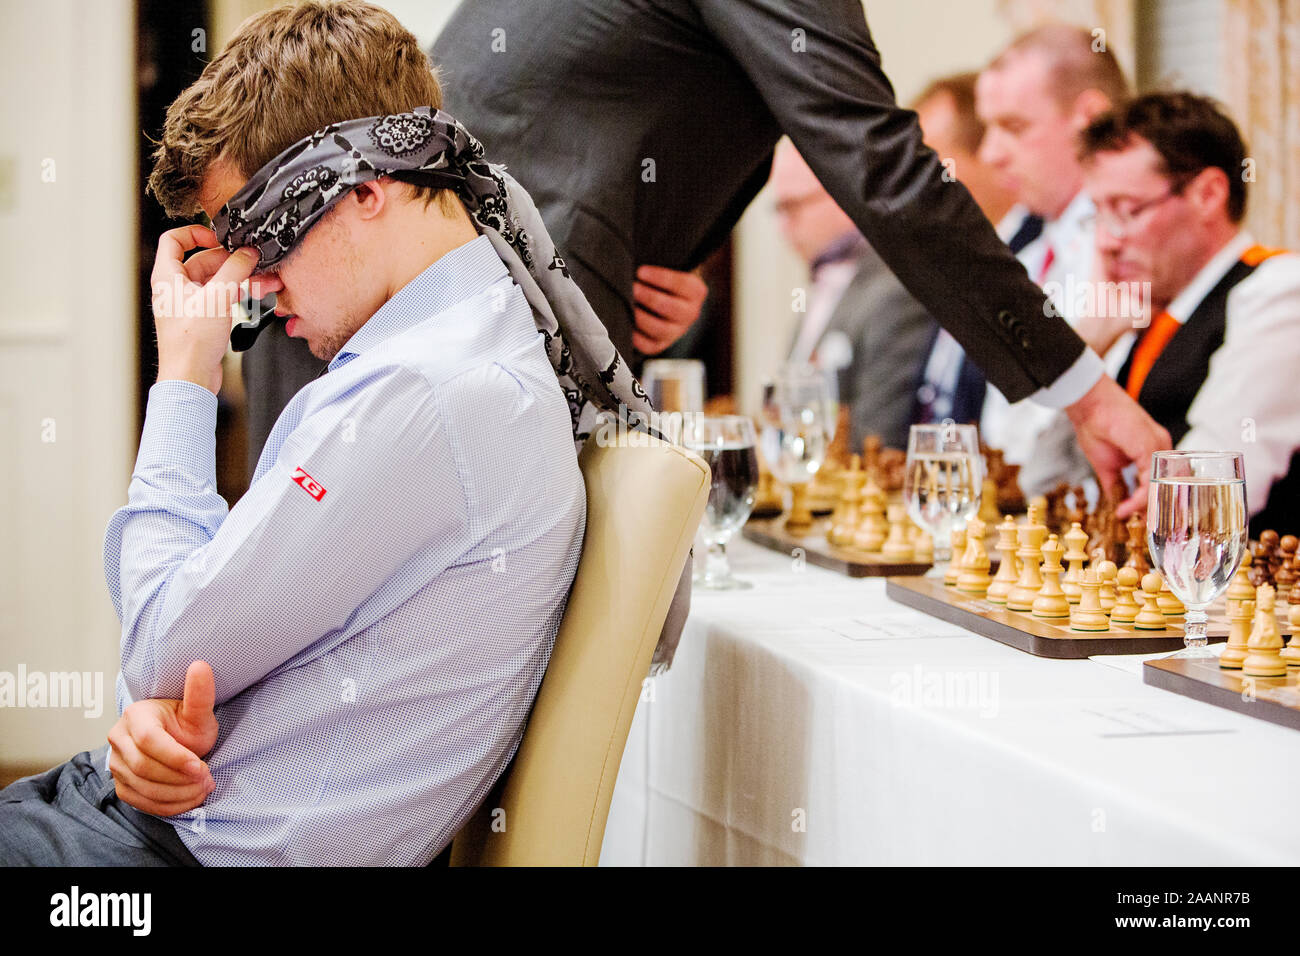 Grandmaster plays 10 simultaneous chess games blindfolded in